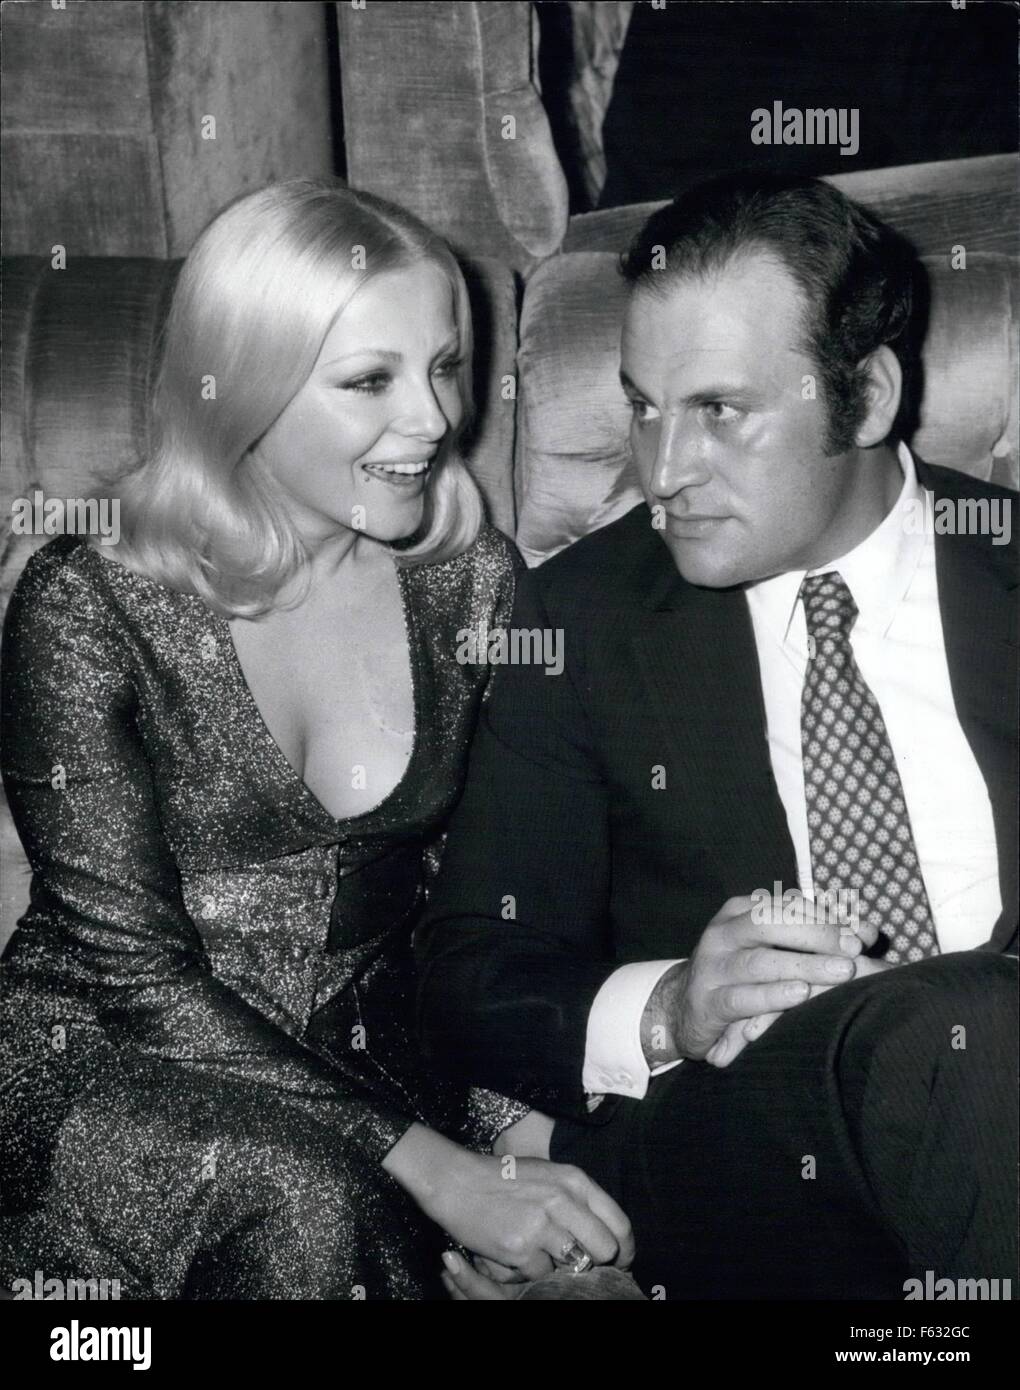 1972 - Great part offered by the well-know press agent Enrico Lucherini, at the occasion of 10th anniversary of his activity on the world of the screen. Photo shows blonde actress Virna Lisi, and her husband Franco Pesci. © Keystone Pictures USA/ZUMAPRESS.com/Alamy Live News Stock Photo